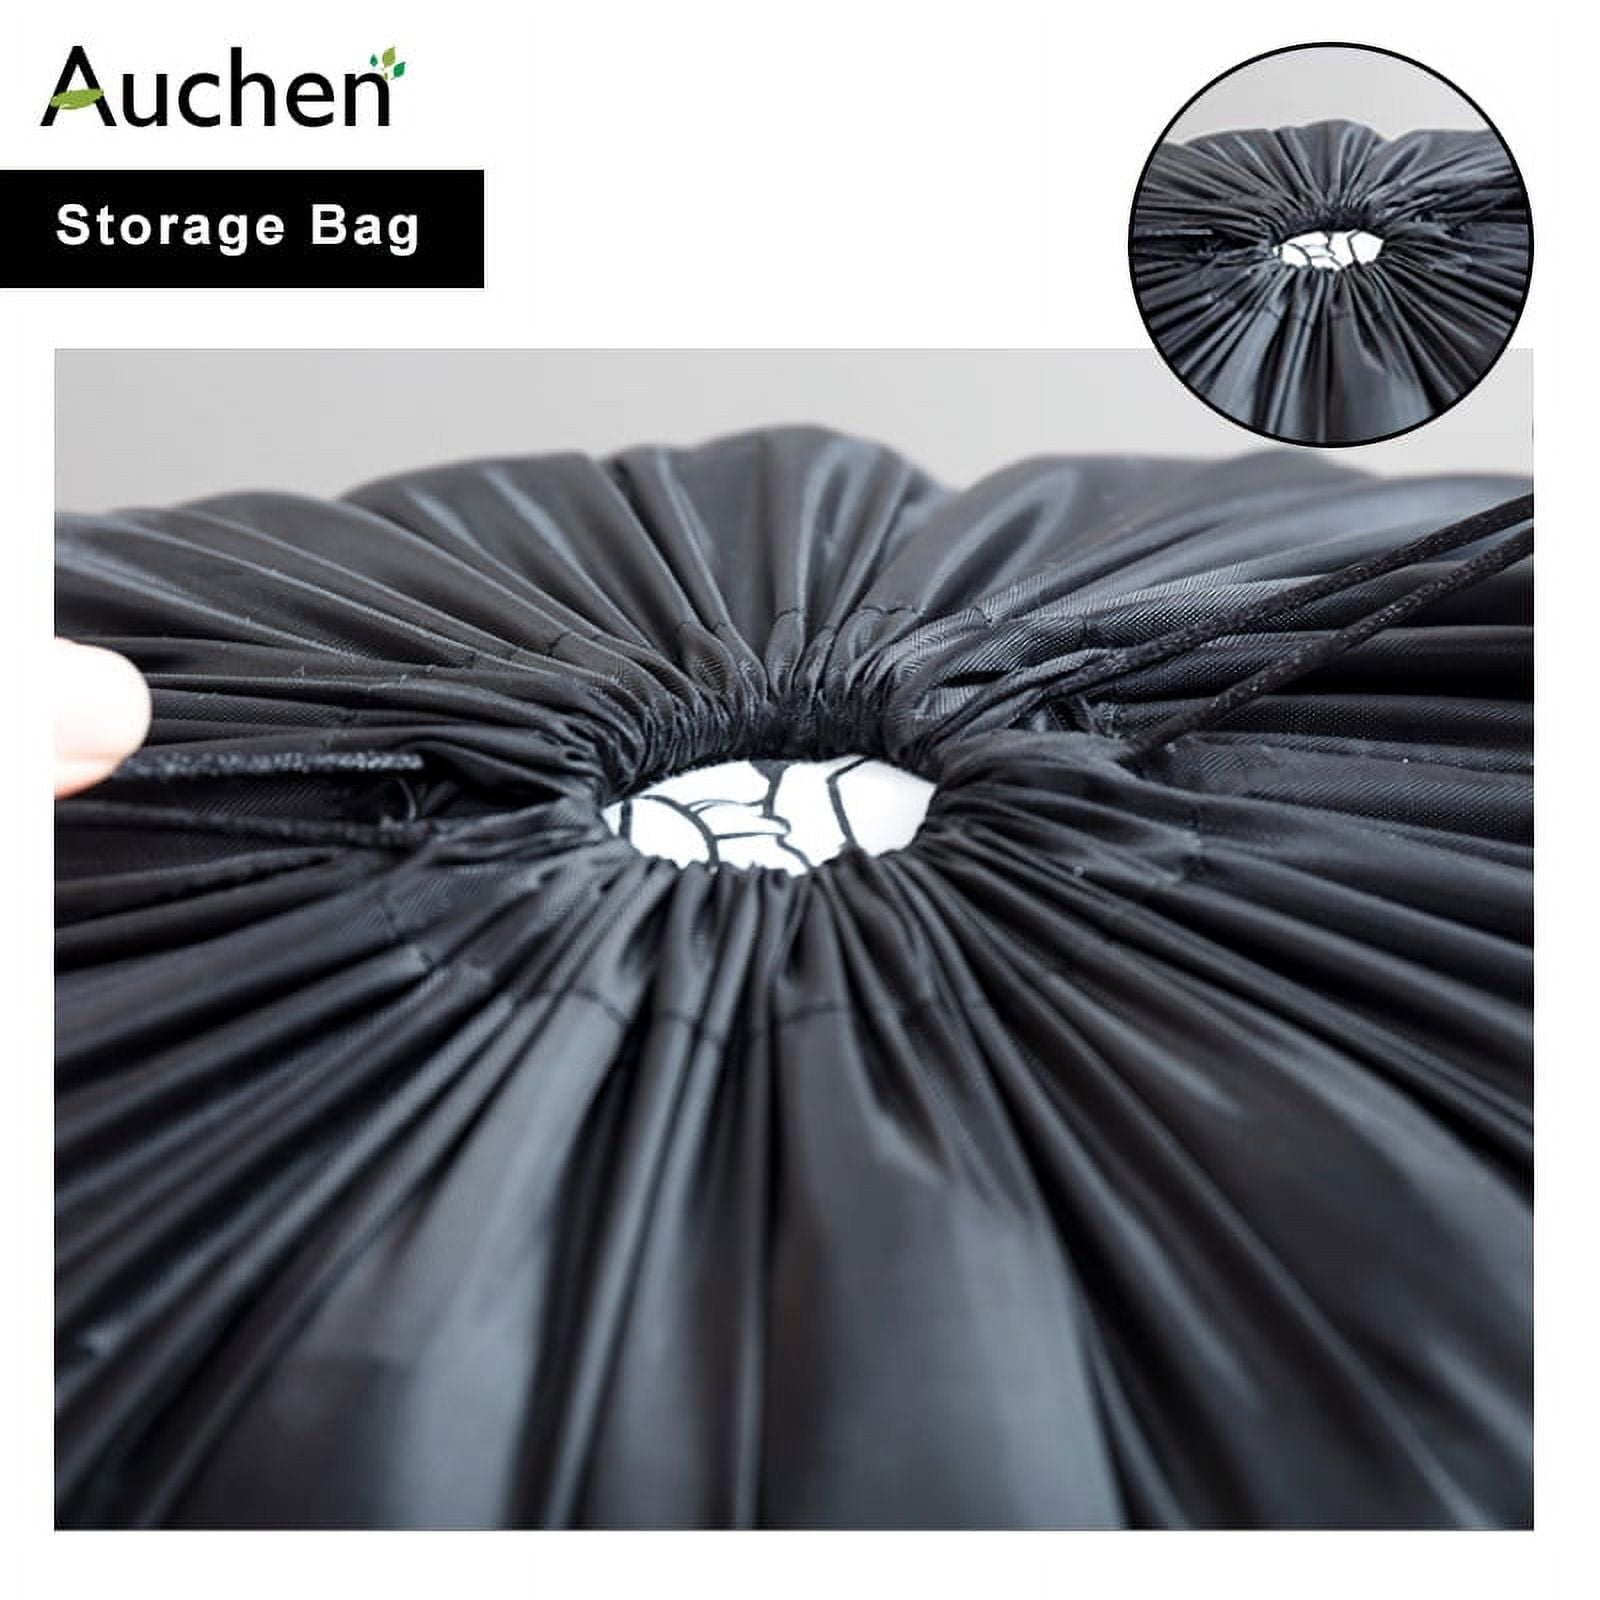 LUCKSTONE Size XXL Drawstring Mesh Laundry Storage Bag Litter Pouch  Multifunction Fishing Net Easy Folding for Travelling Camping Hiking -  Black - Snatcher